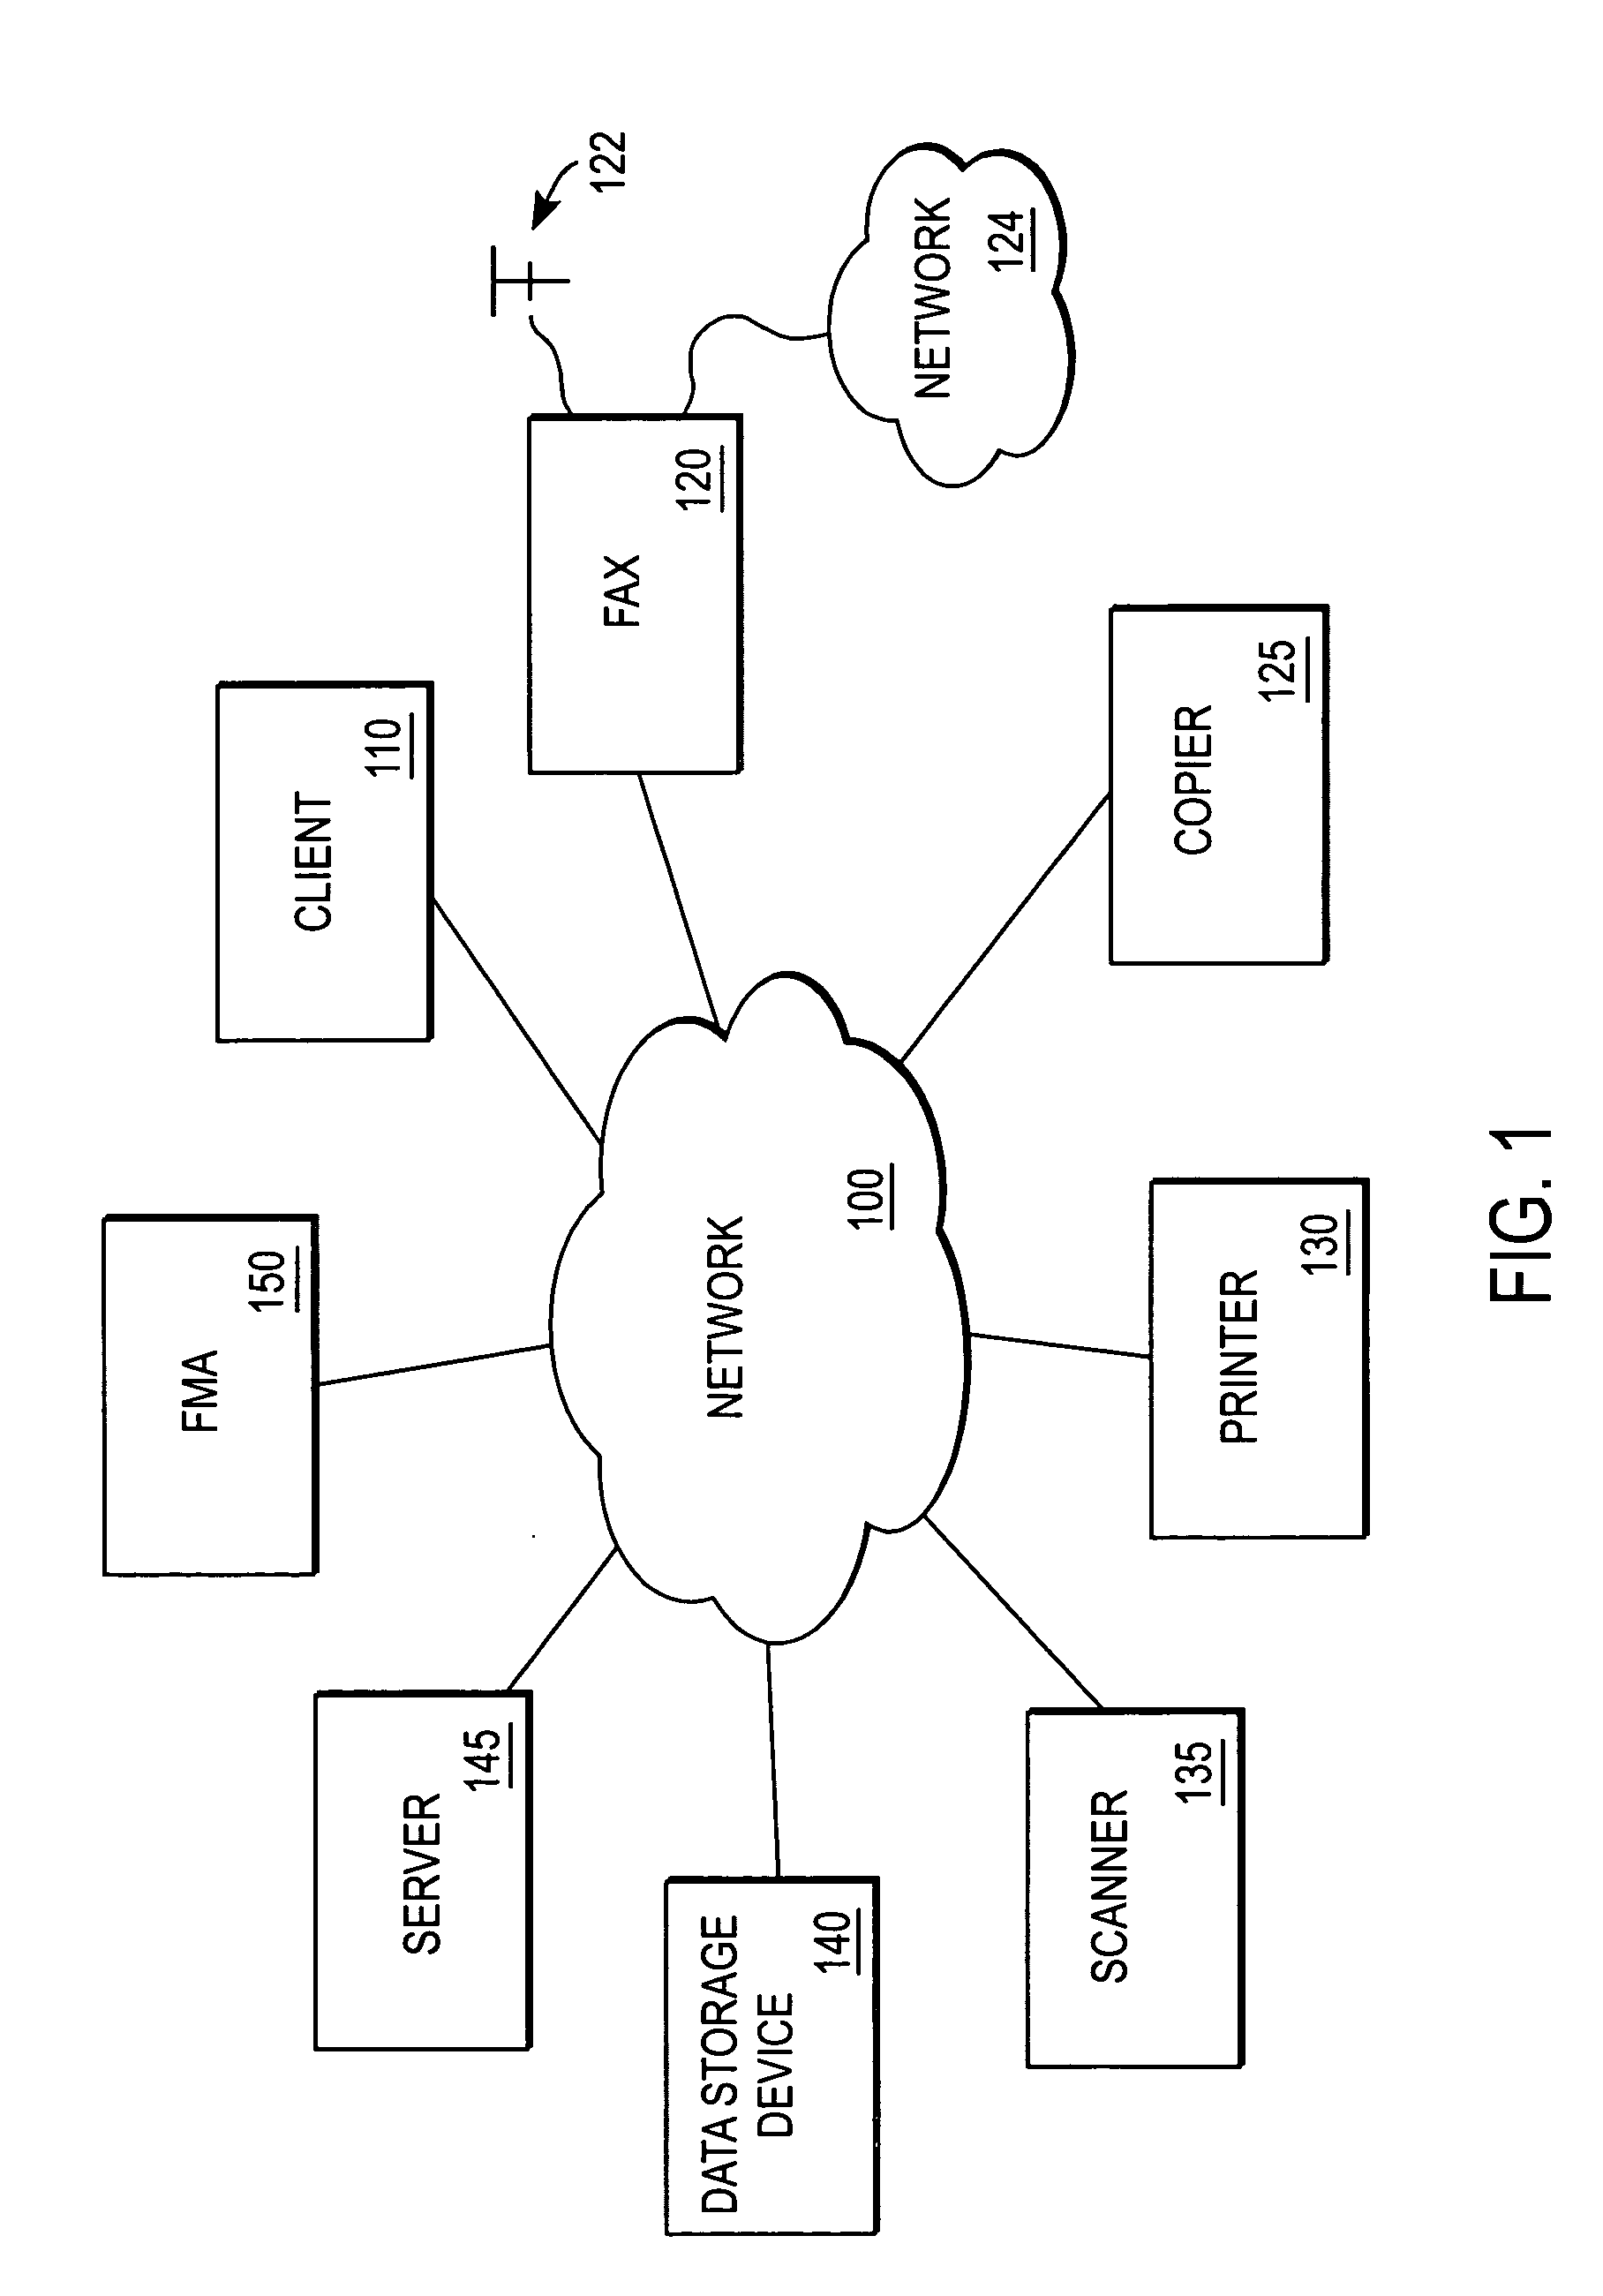 System for capturing facsimile data in an electronic document management system